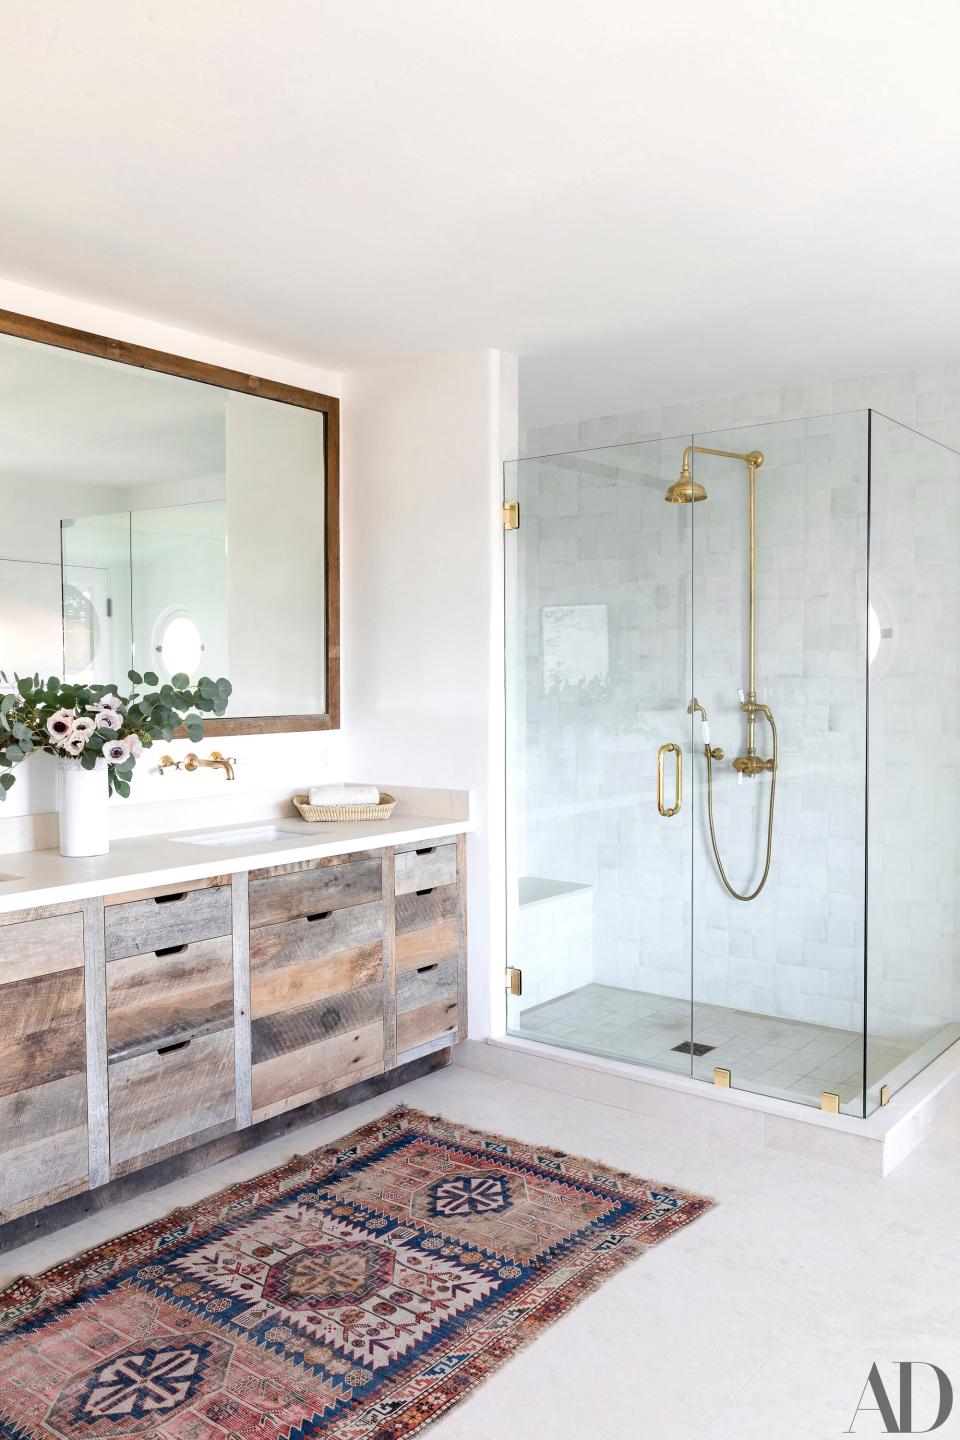 “I’d seen this amazing bathroom [Jakde Arnold] had done for Julianne Hough and already followed him on Instagram," Tisdale says of her notable interior designer. "I interviewed a few other people first, but then I was like, ‘I gotta go with him. He designed my favorite bathroom.’”